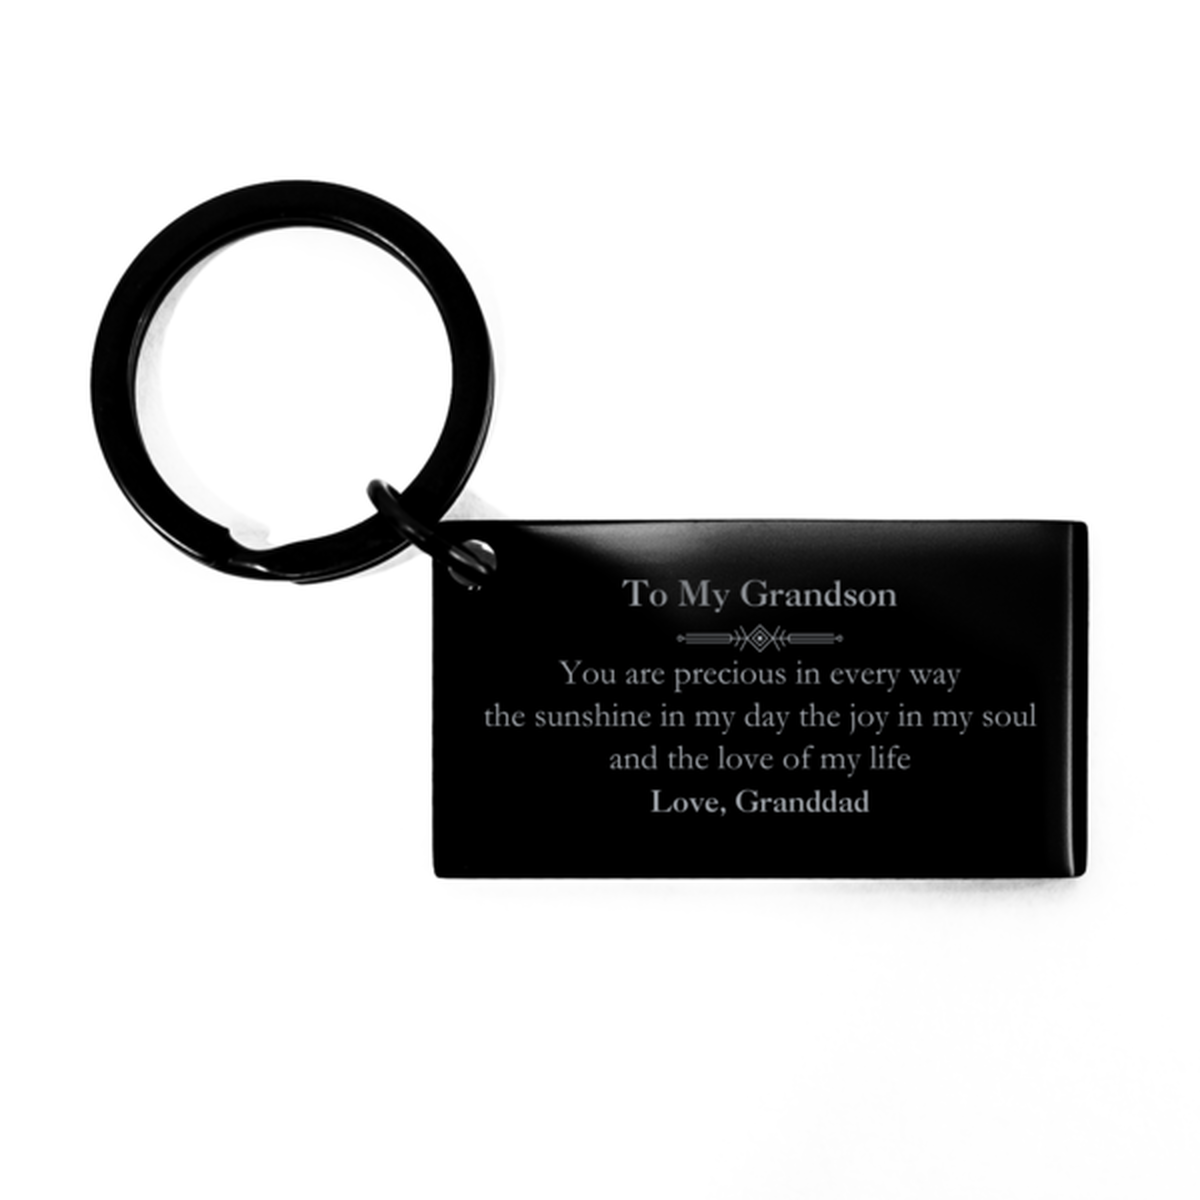 Graduation Gifts for Grandson Keychain Present from Granddad, Christmas Grandson Birthday Gifts Grandson You are precious in every way the sunshine in my day. Love, Granddad